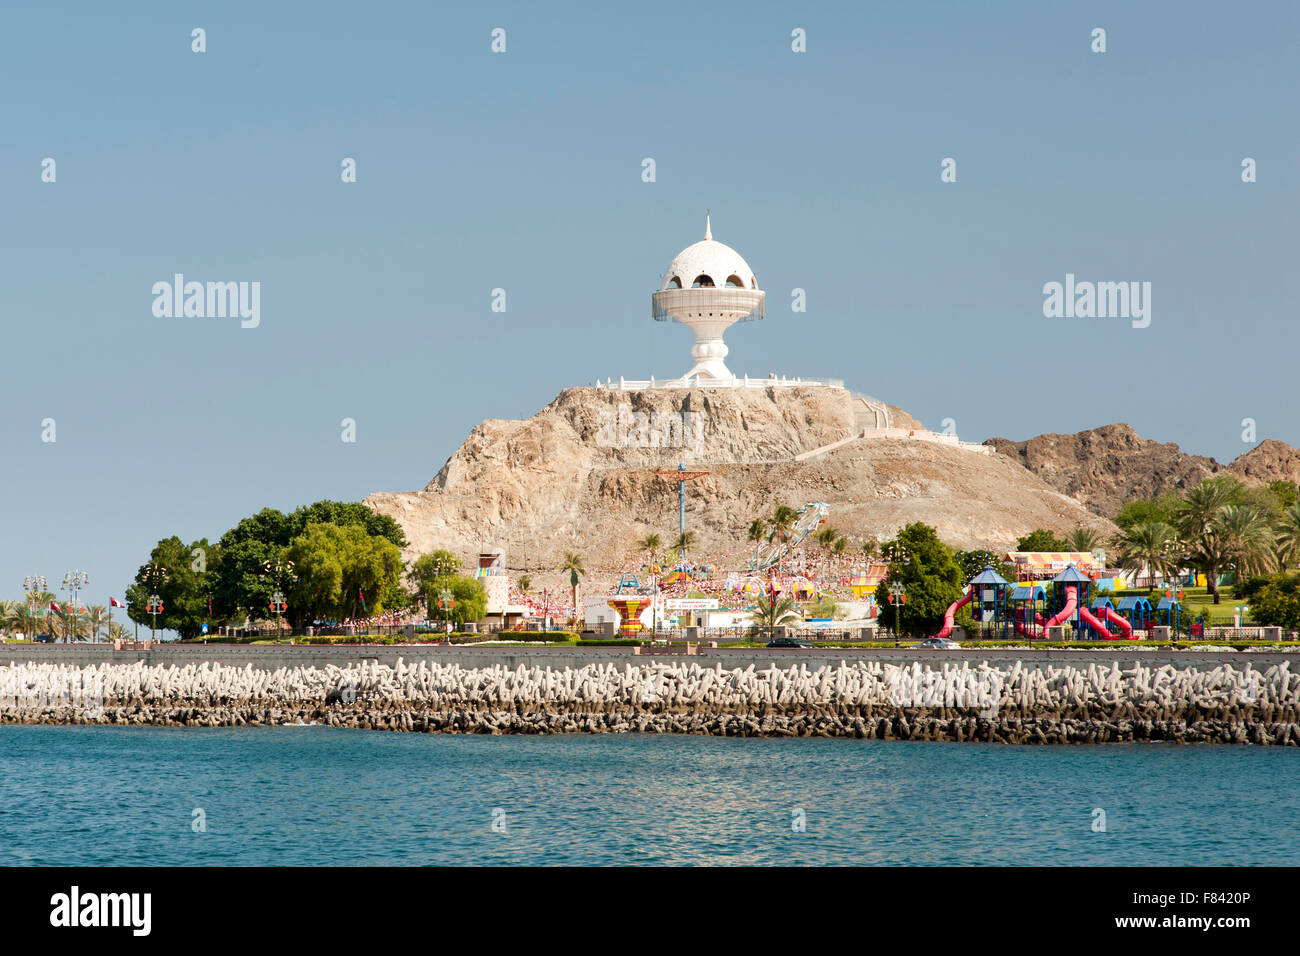 Riyam amusement park and the Frankincense burner monument on the Mutrah corniche in Muscat, the capital of the Sultanate of Oman Stock Photo